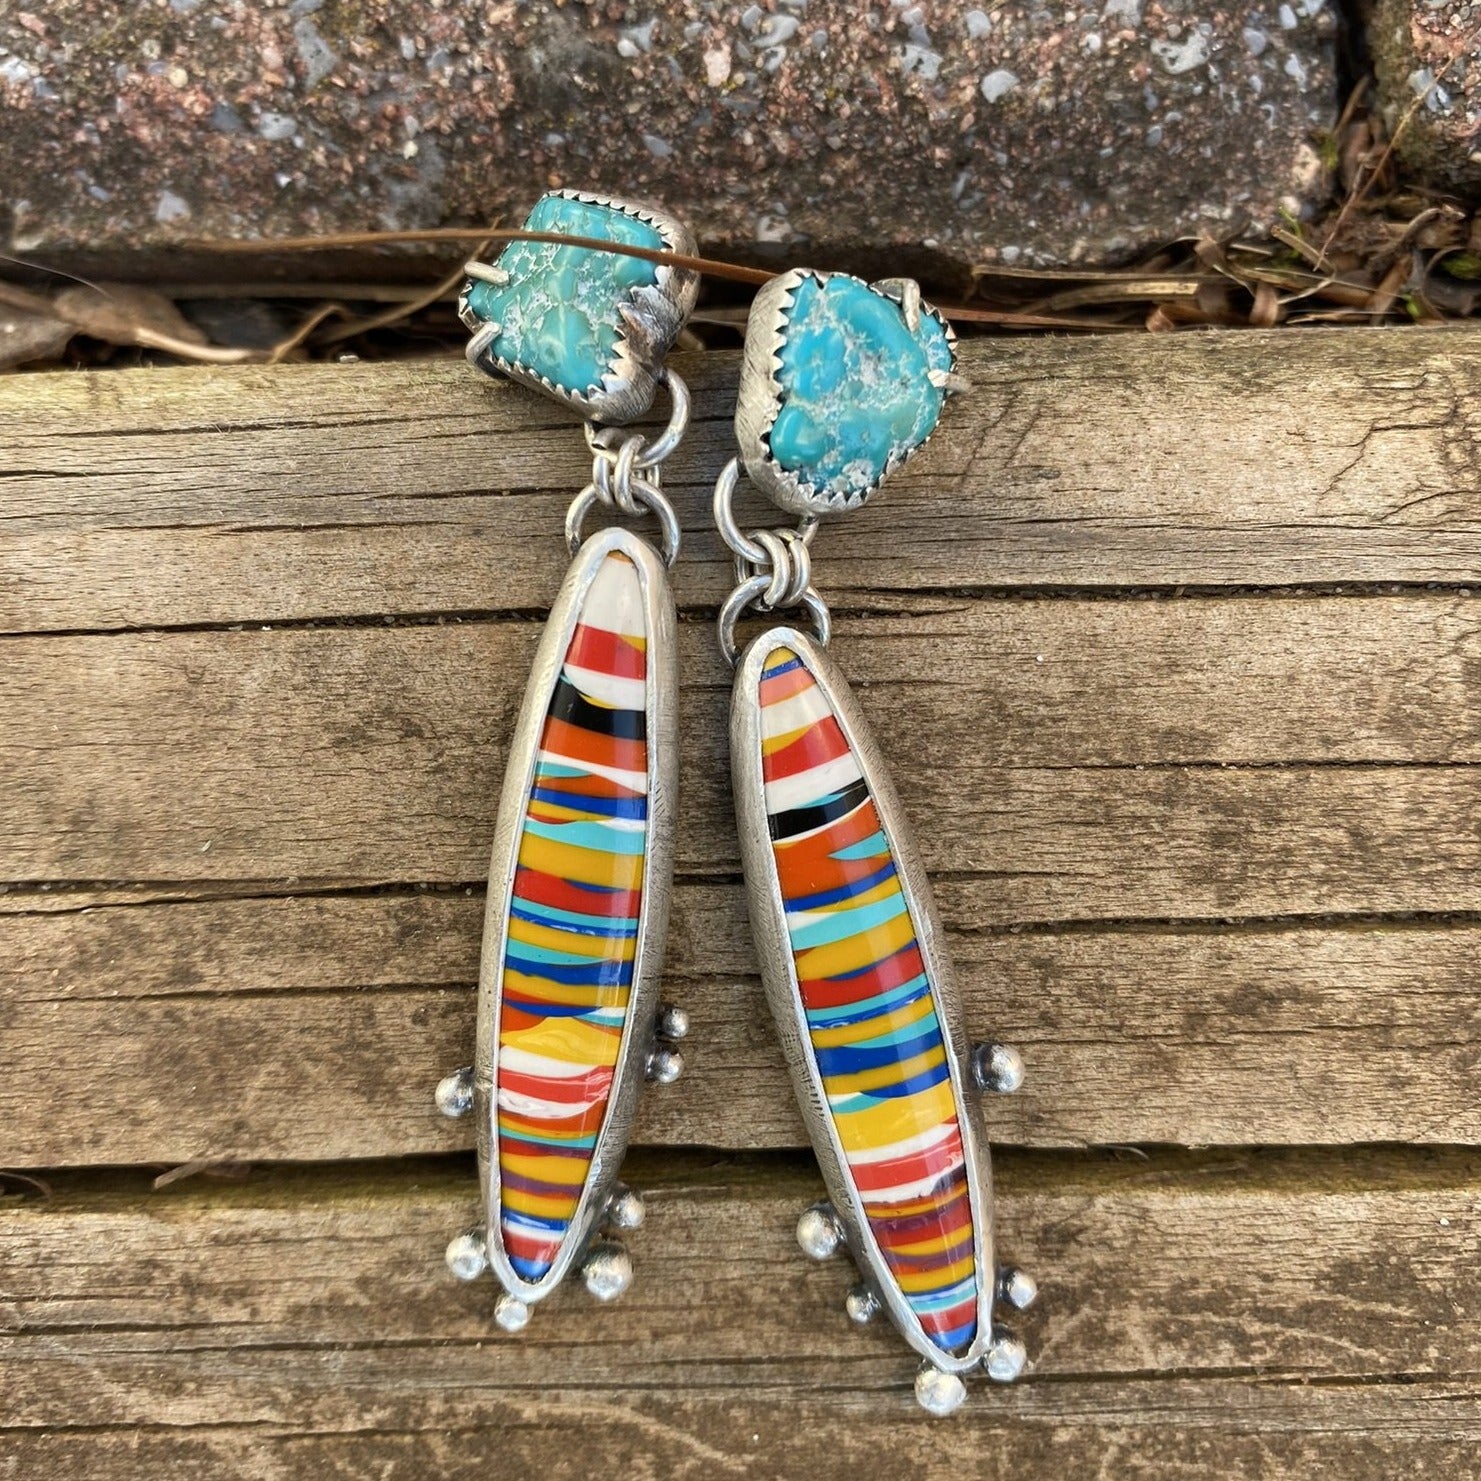 Candelaria Turquoise Nugget & Surfite Earrings